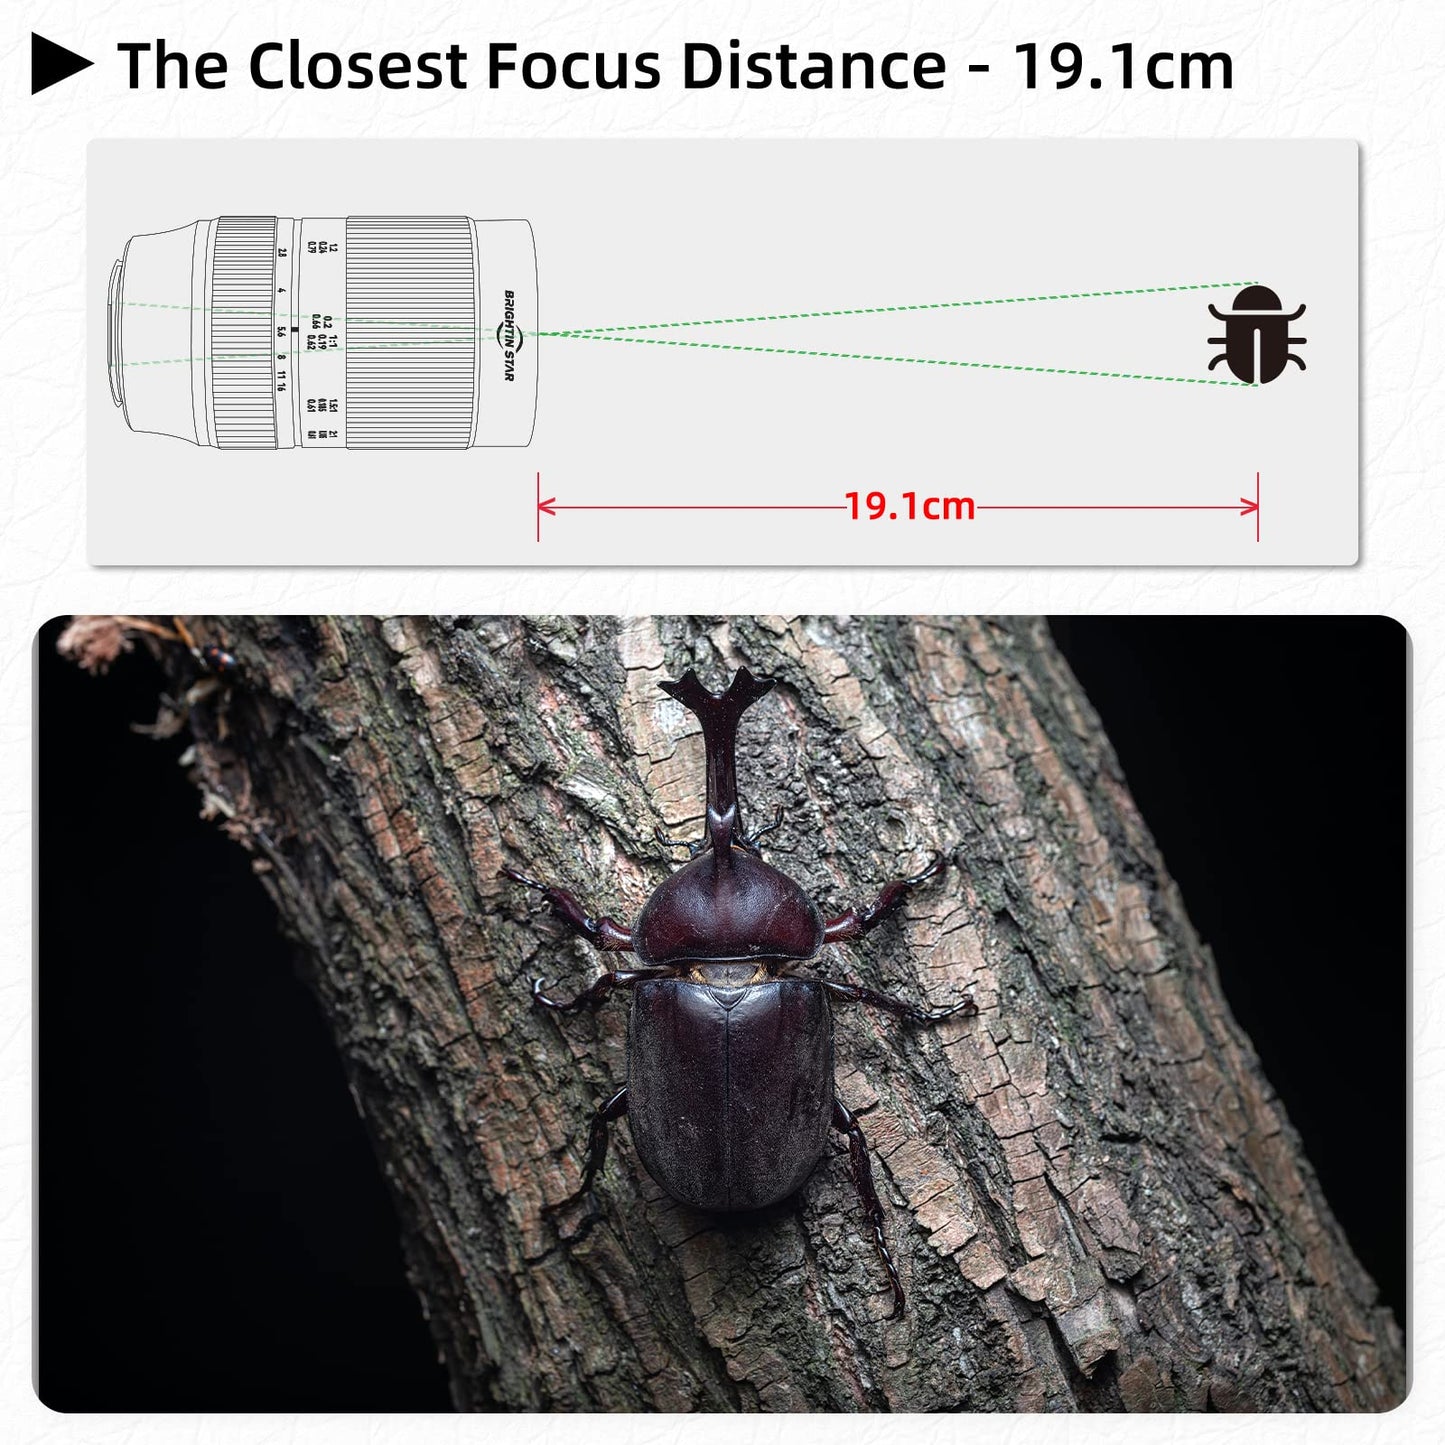 60mm F2.8 2X Macro Magnification Manual Focus Mirrorless Camera Lens, Fit for Sony E-Mount